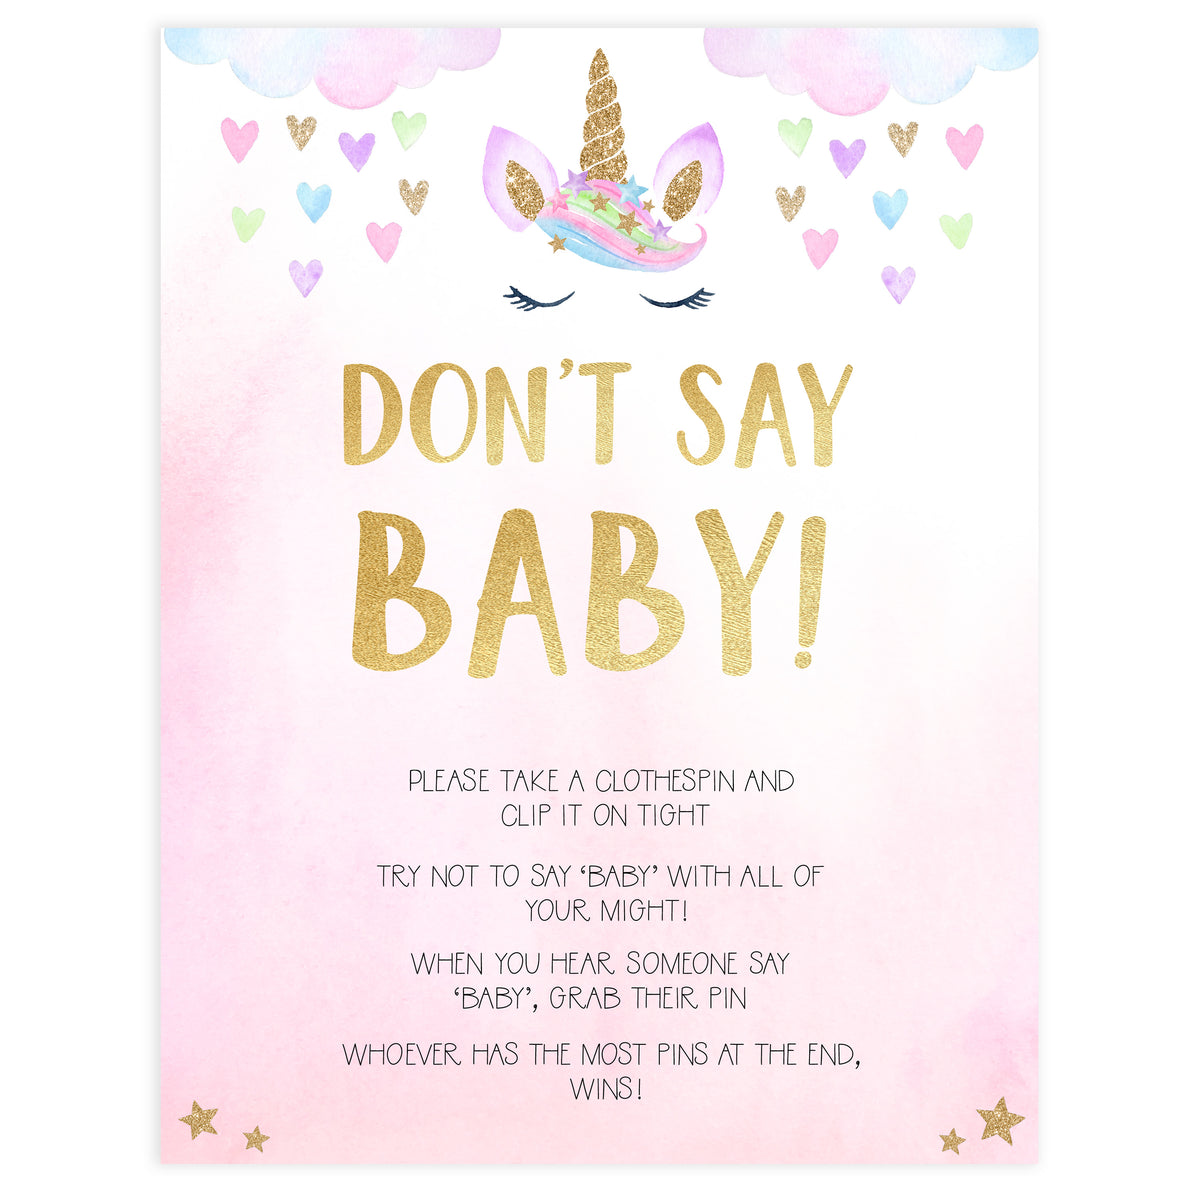 dont say baby game, Printable baby shower games, unicorn baby games, baby shower games, fun baby shower ideas, top baby shower ideas, unicorn baby shower, baby shower games, fun unicorn baby shower ideas